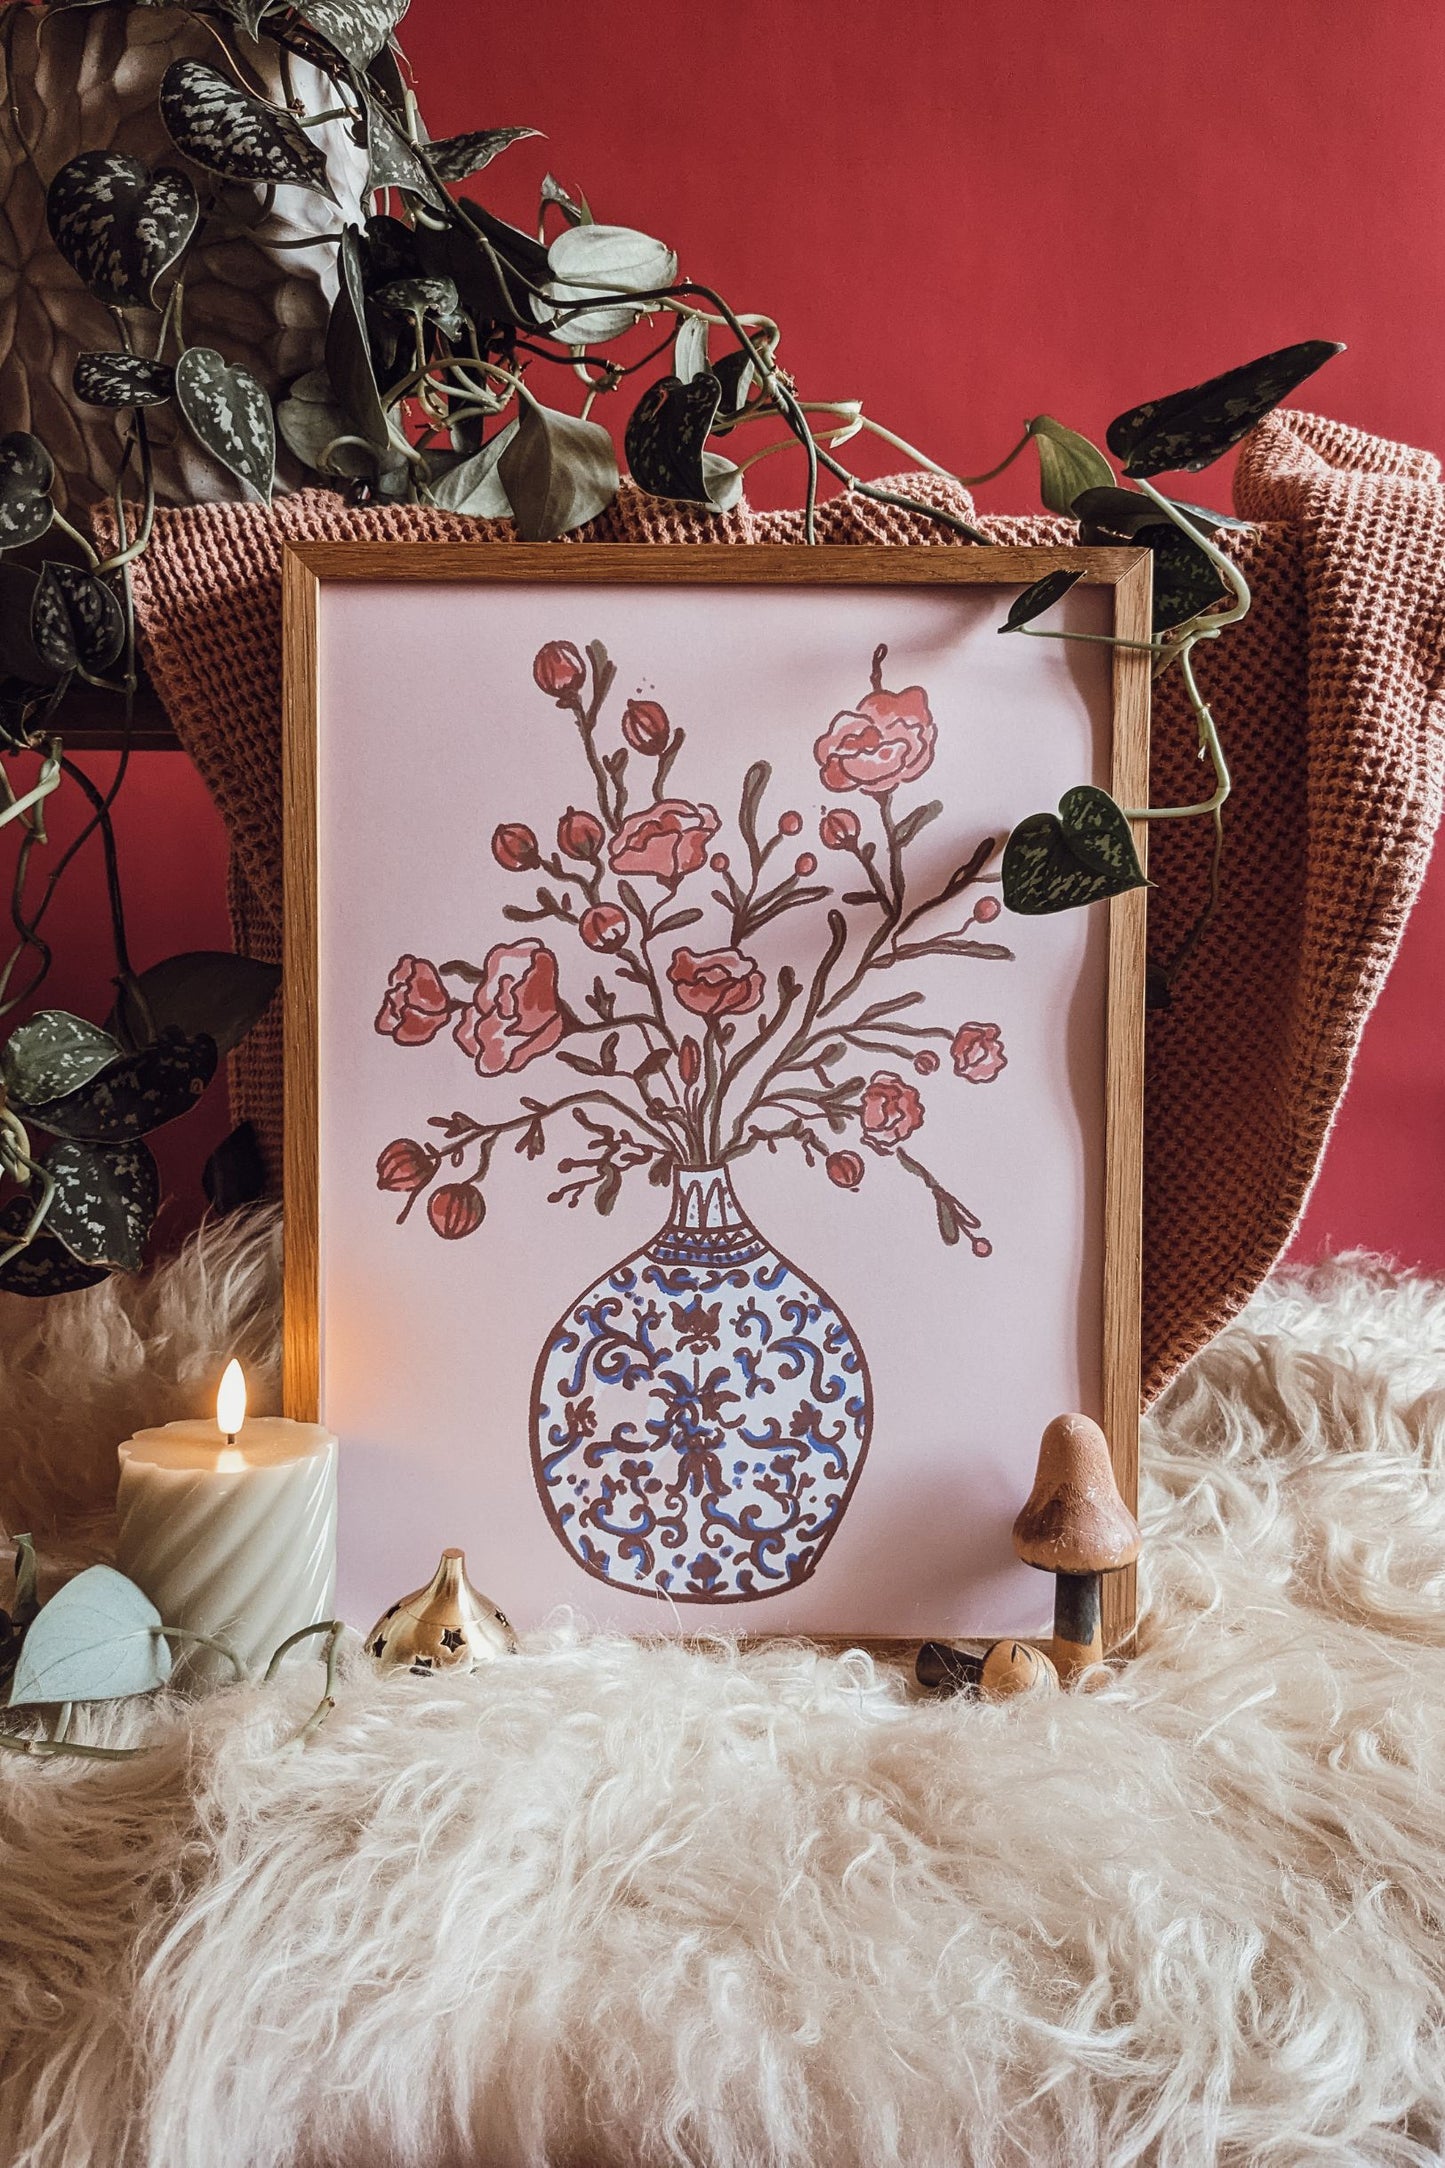 'A Room Full Of Blooms' Illustrated Art Print